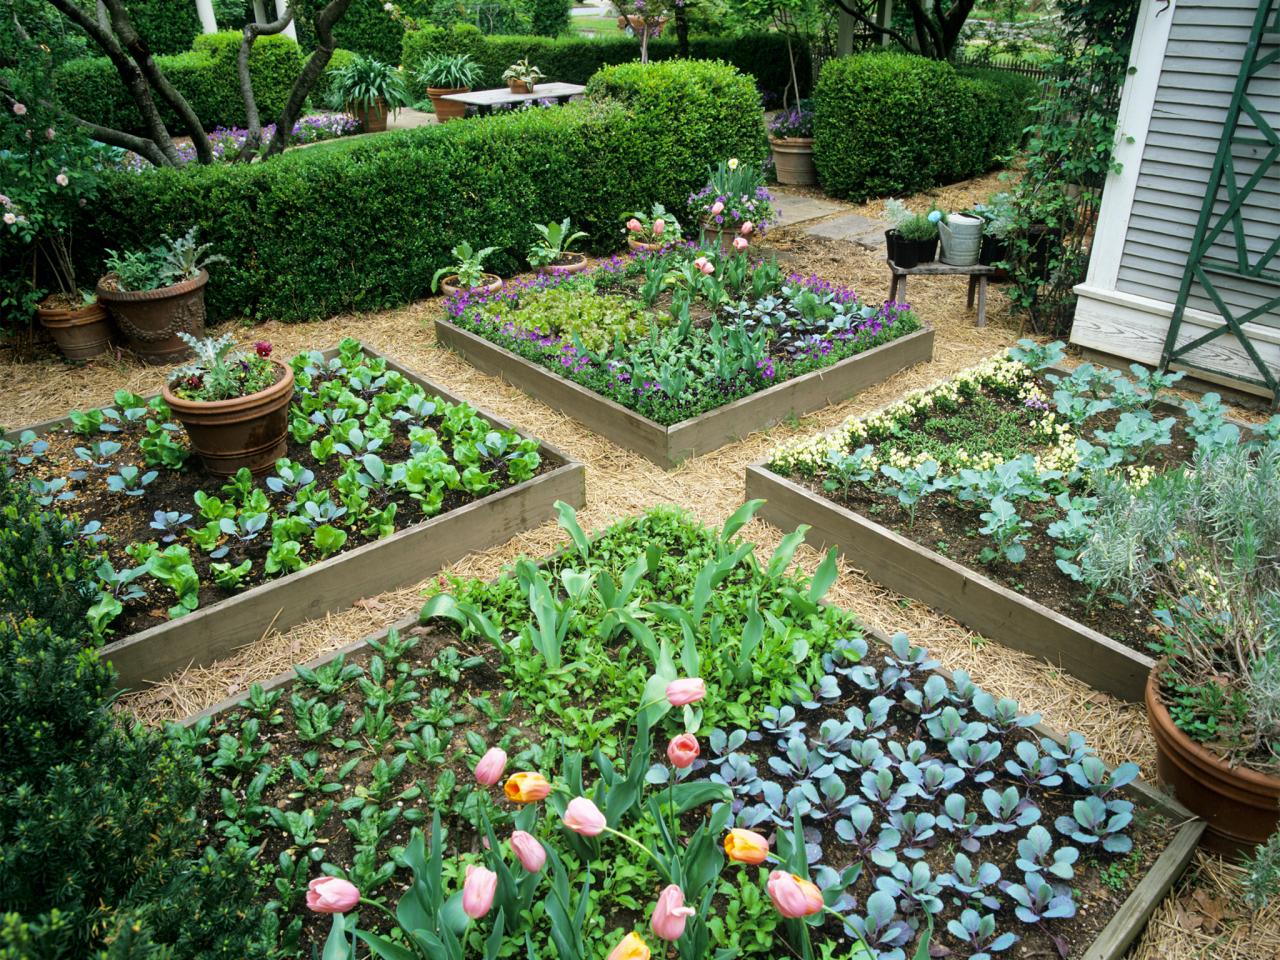 Intensive gardening is defined by making the best, most efficient